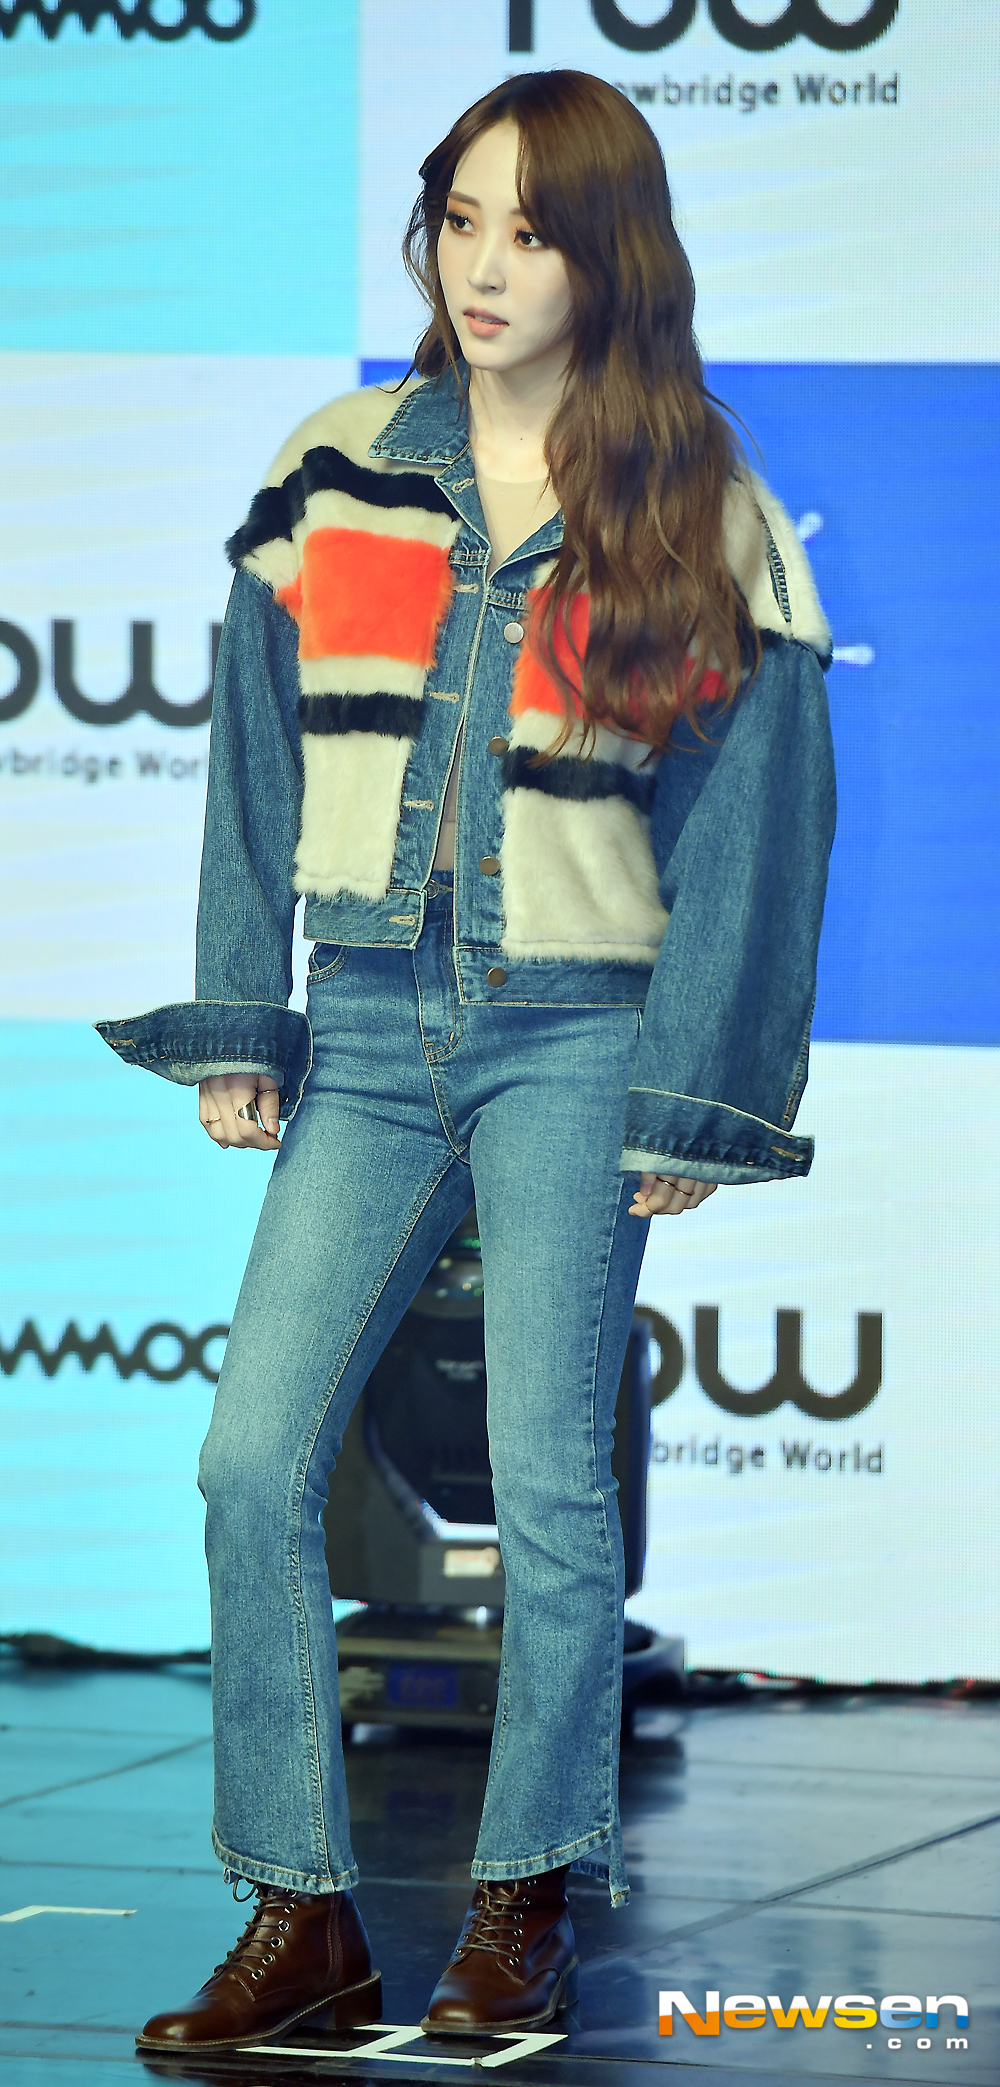 The 8th Mini album BLUE;S media showcase of MAMAMOO (Wheein, Moonbyul, Sola) was held at the Cheongdam-dong Ilji Art Hall in Gangnam-gu, Seoul on the afternoon of November 29MAMAMOO Moonbyul is responding to the photo pose on the day.expressiveness